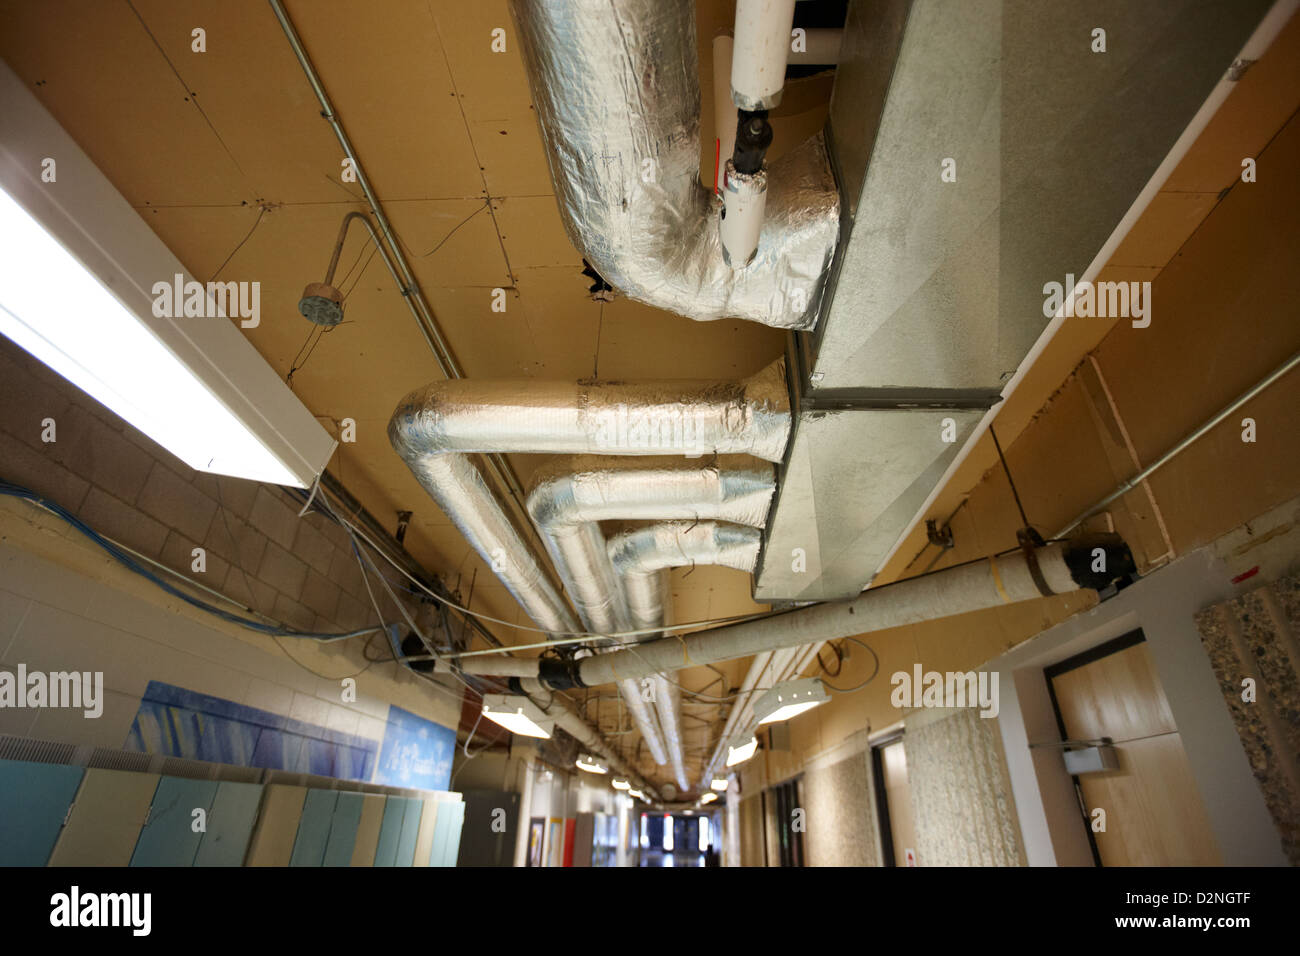 exposed insulated heating and ventilation ducts High school canada north america Stock Photo